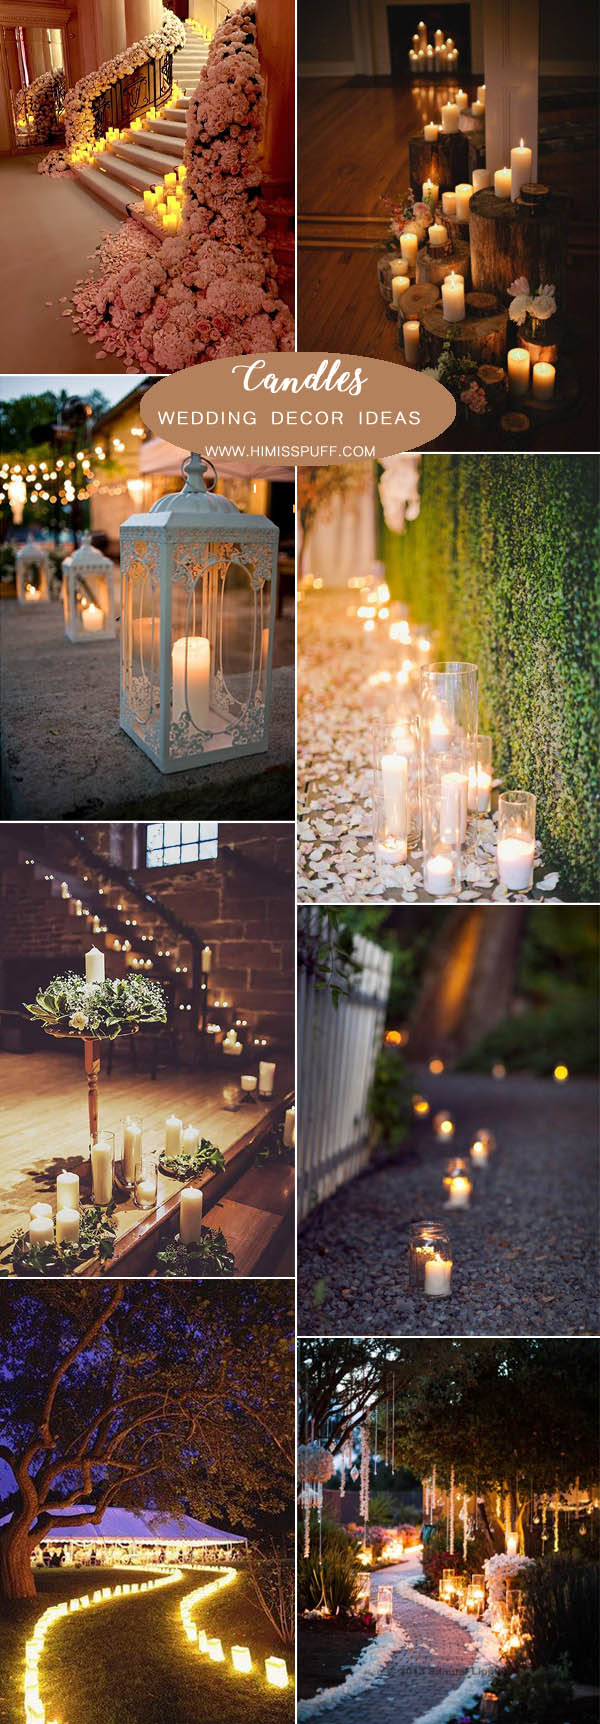 impossibly gorgeous way to add candle lights to your wedding decor